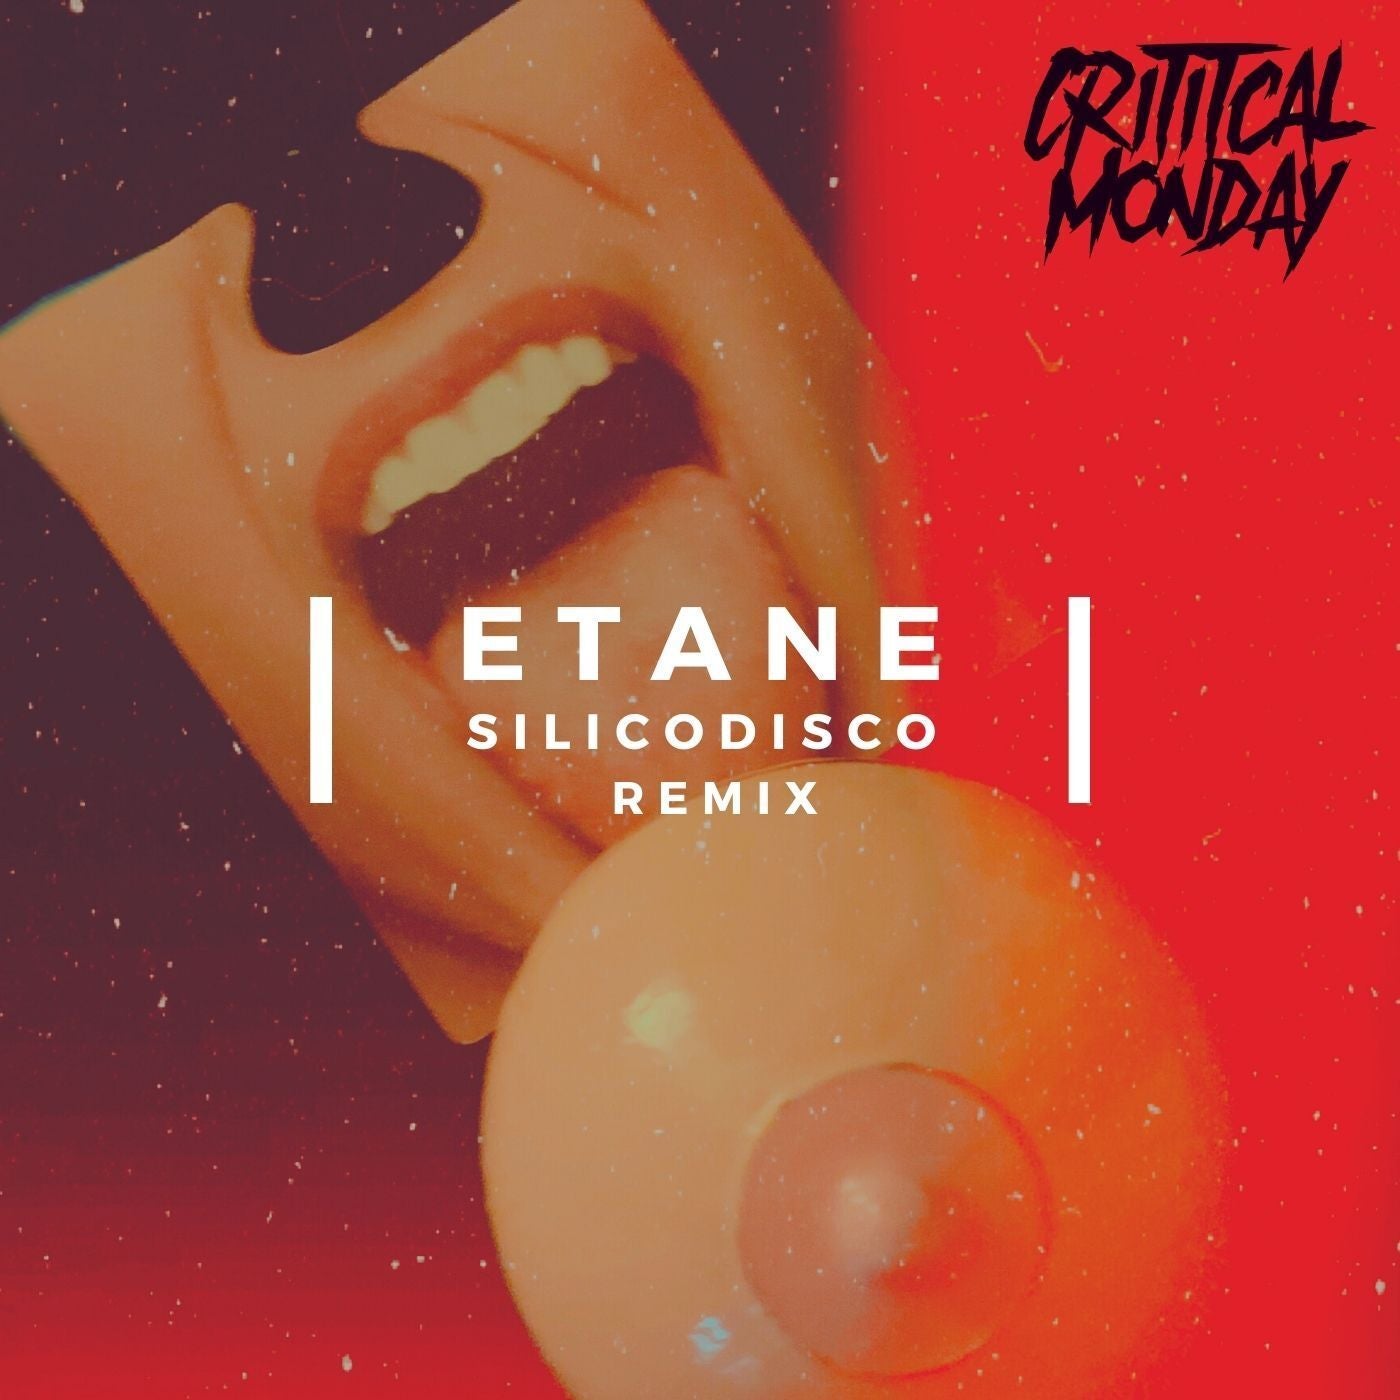 Etane - For The Fire Is Dying (Original Mix)